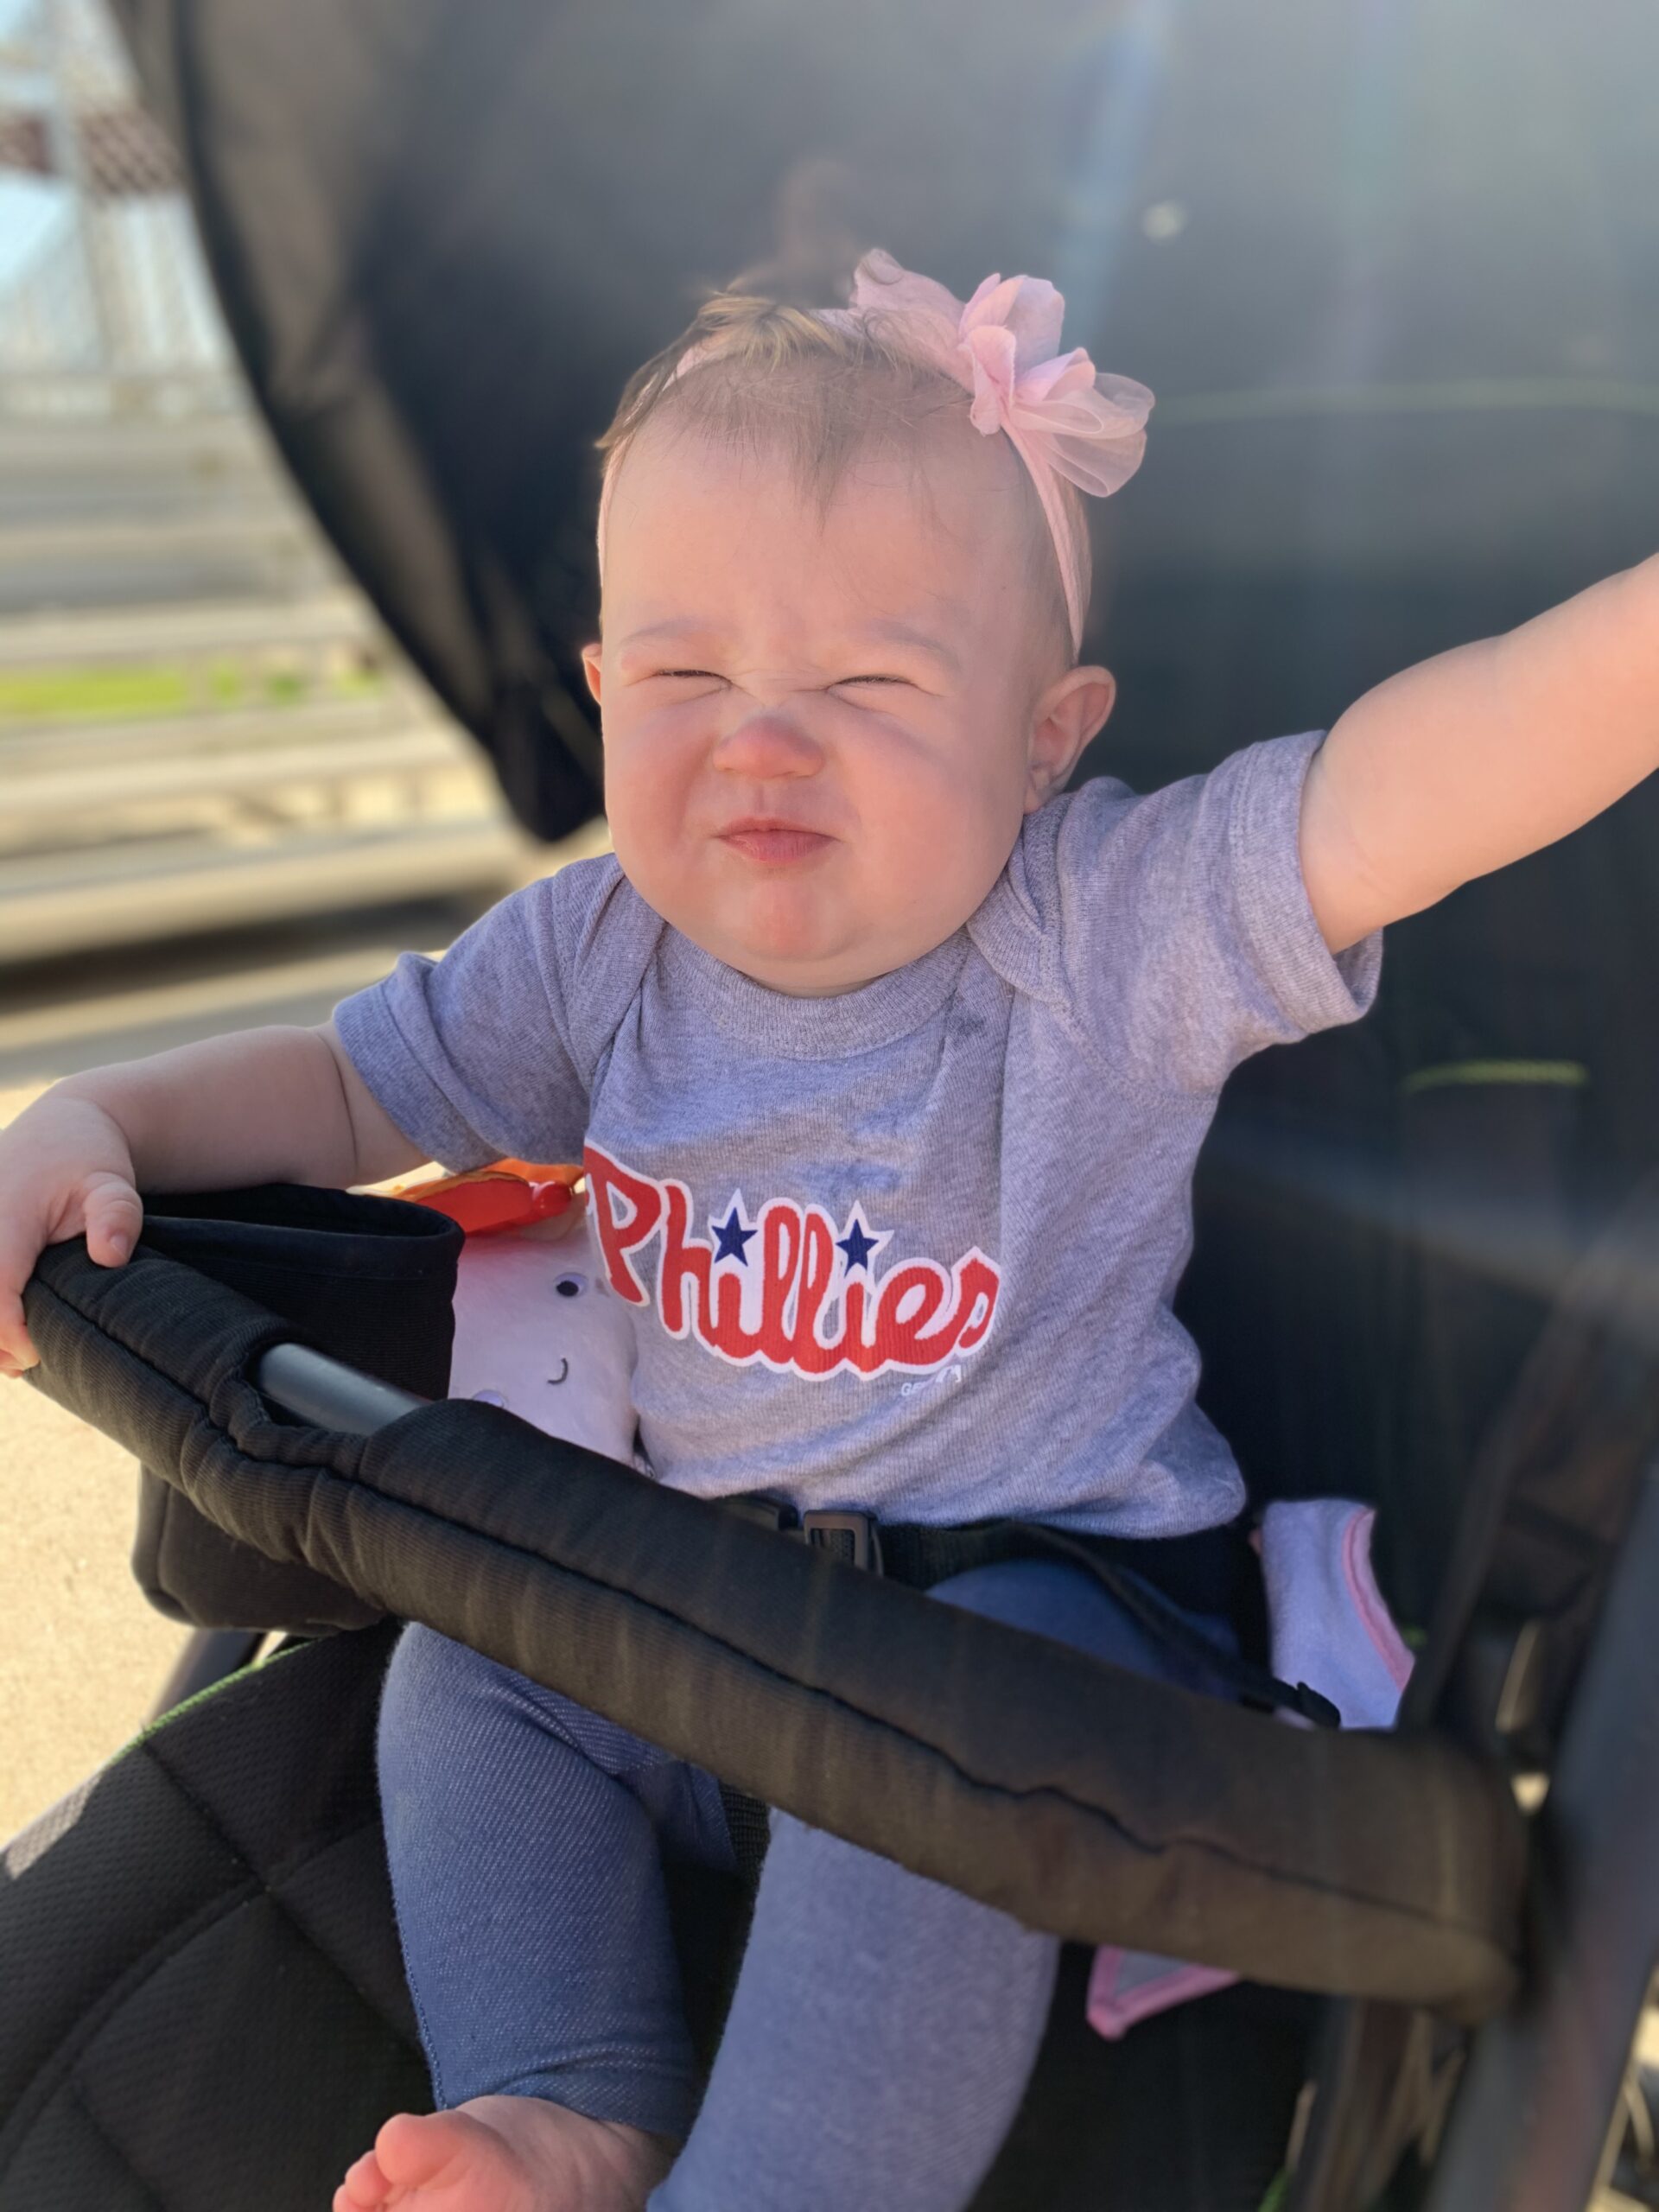 baby in stroller scrunching her face with a pink headband and a Phillies shirt